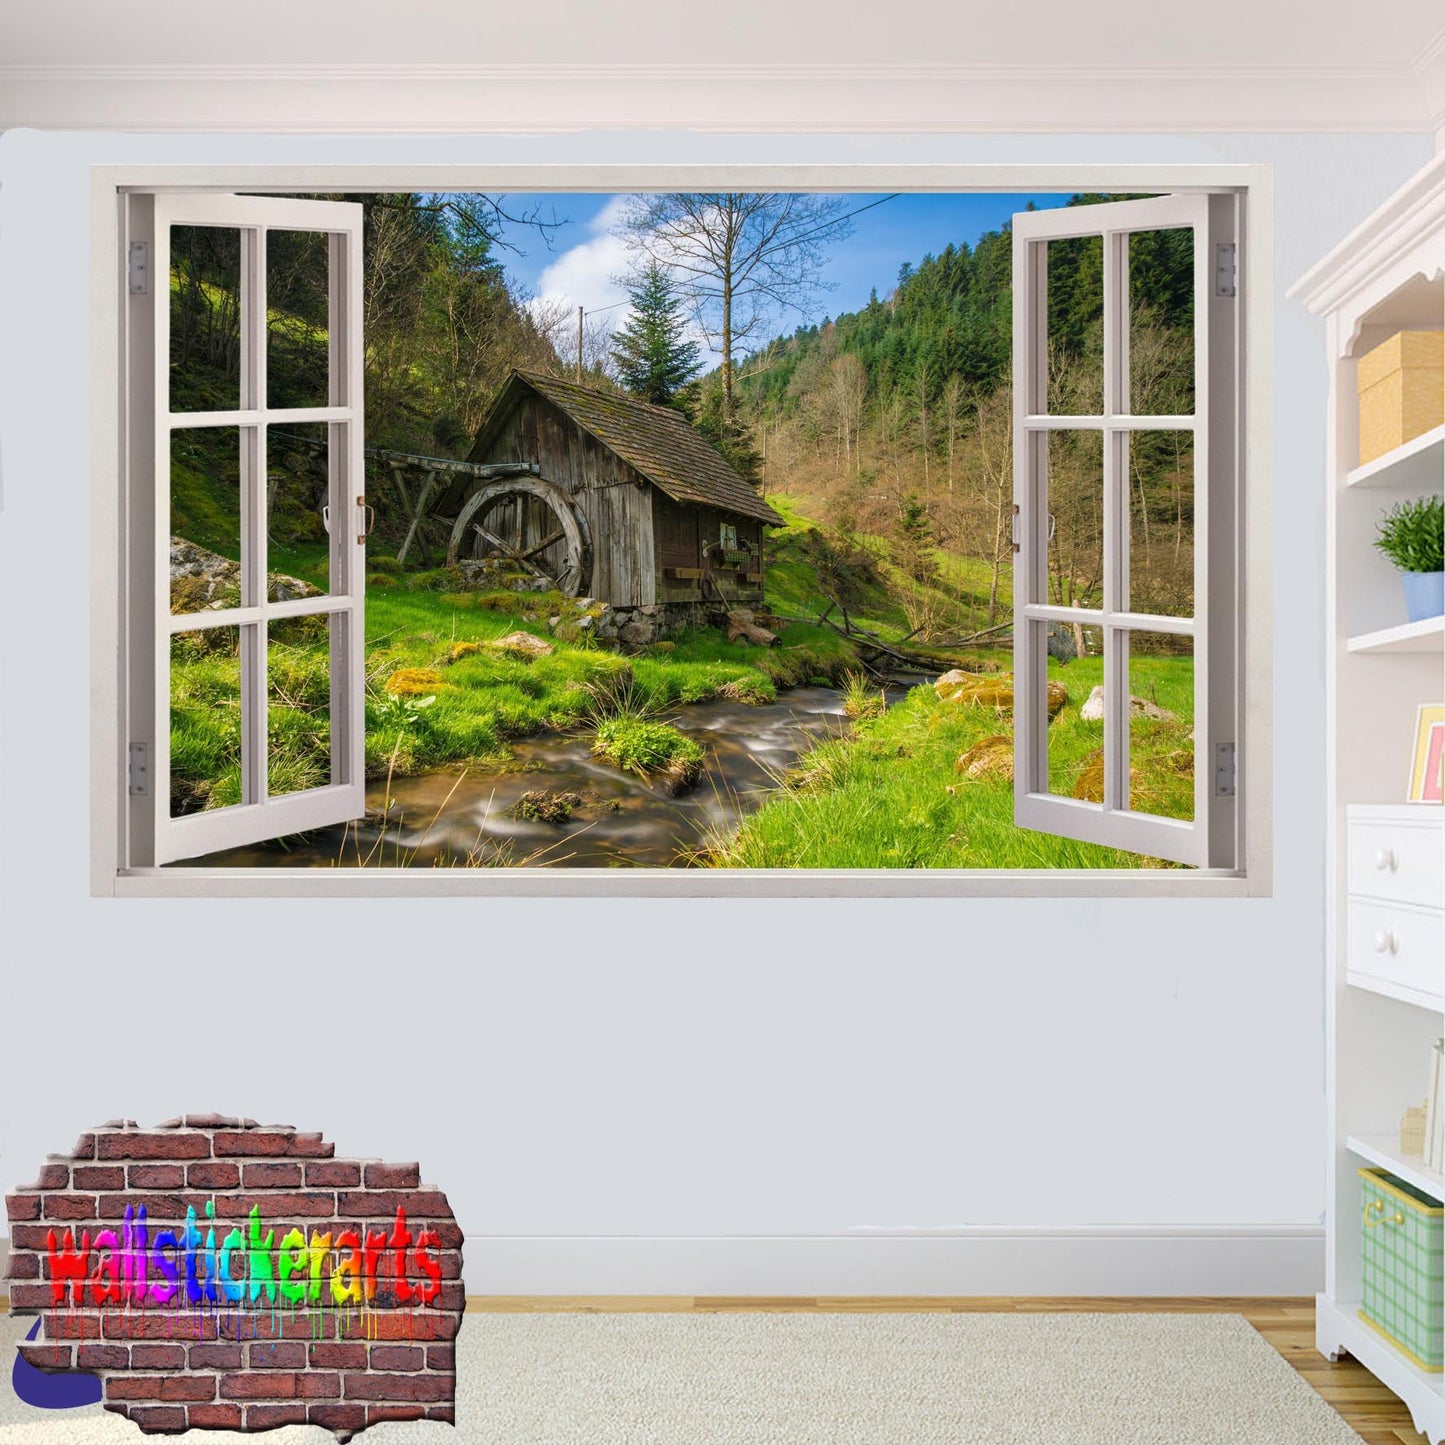 Old Mill House by River 3d Art Wall Sticker Mural Room Office Shop Decor Decal YJ4